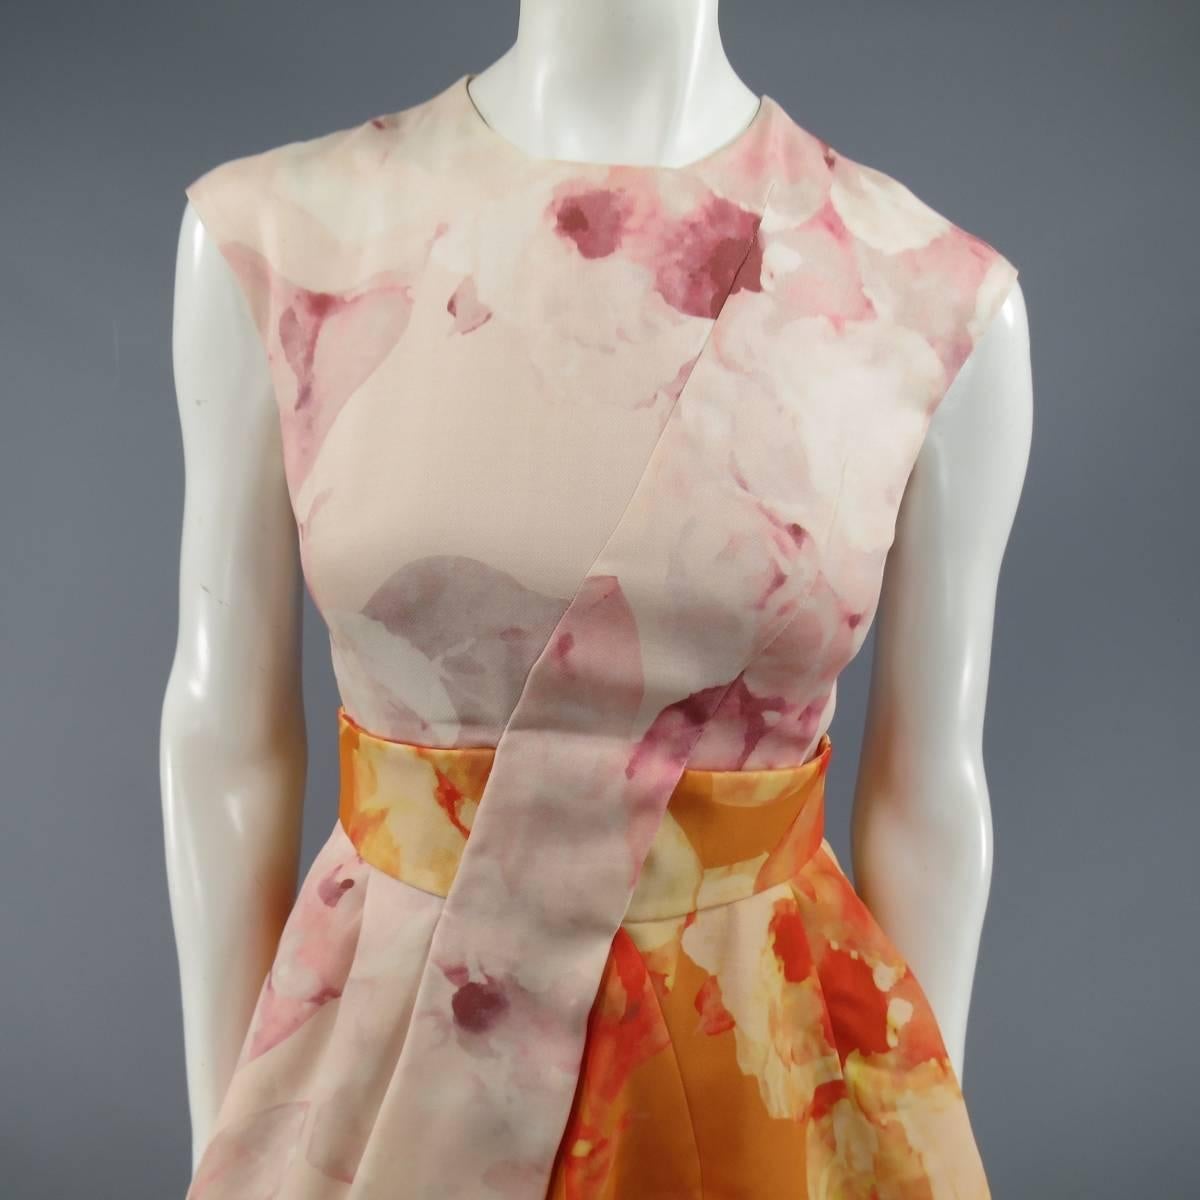 This gorgeous CHRISTIAN DIOR sleeveless cocktail dress comes in a pink and orange watercolor floral print silk wool fabric and features a high round neckline, orange belted waist with pink overlay panel, and pleated A line skirt with crinoline and